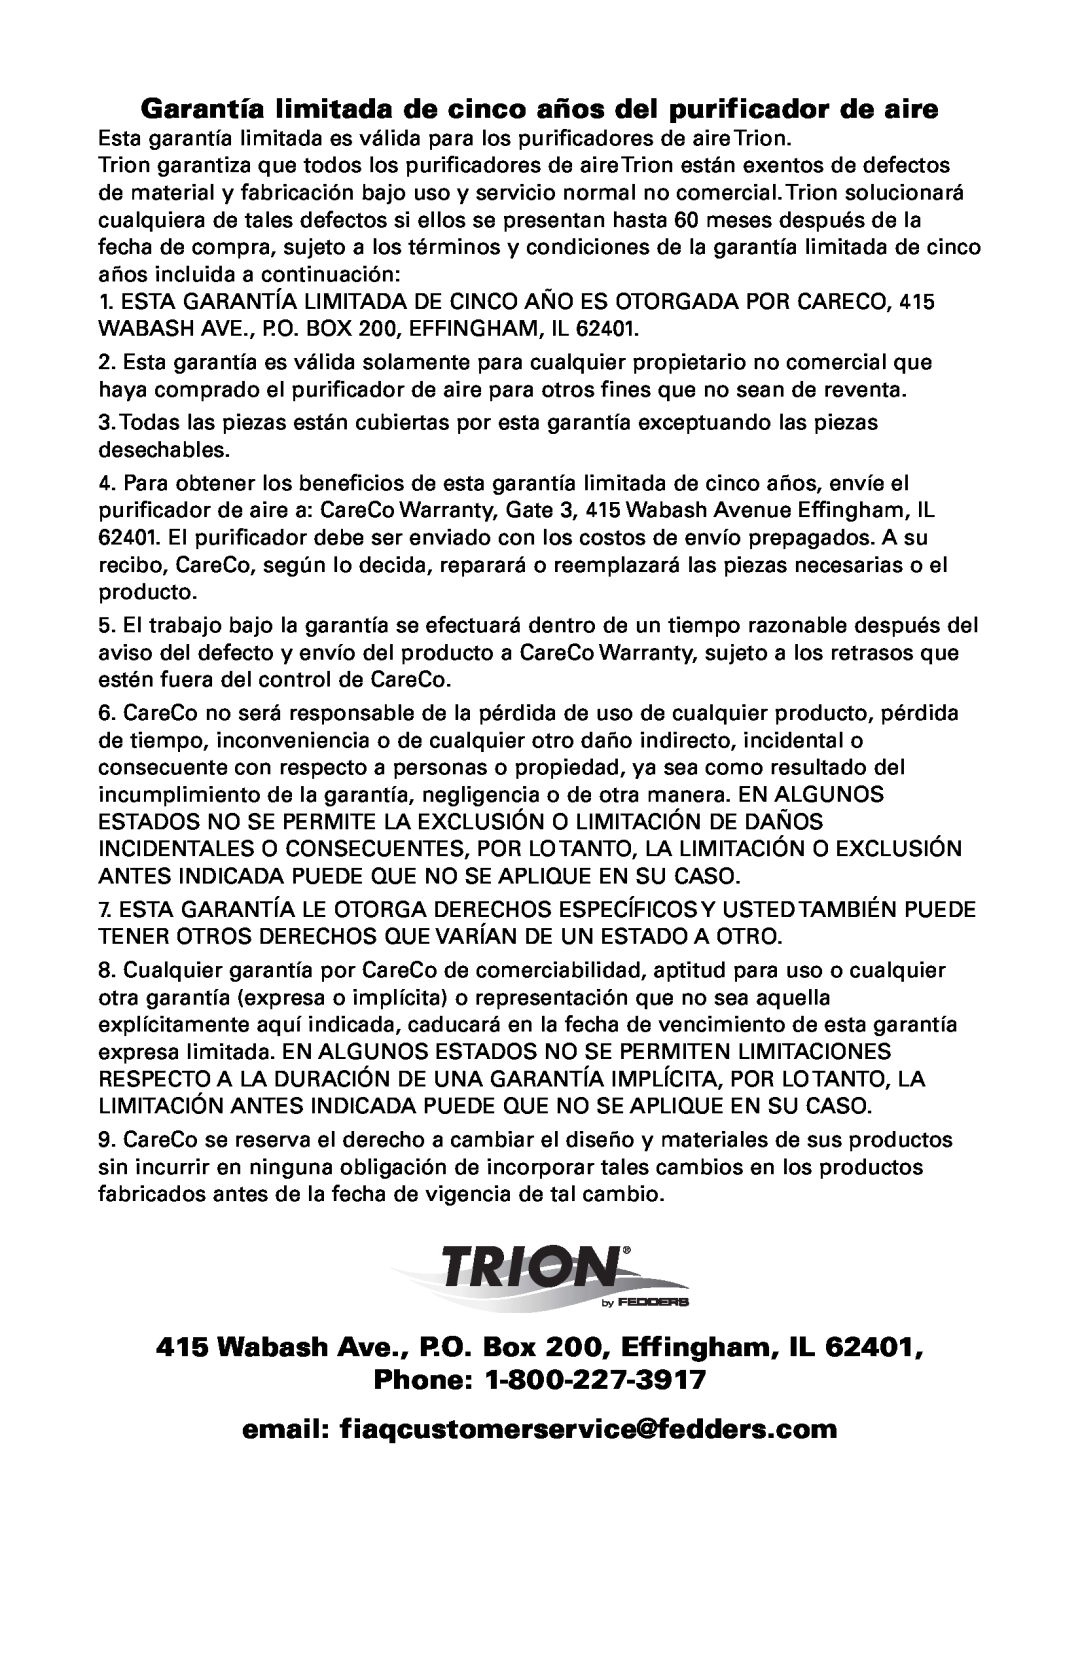 Trion High Efficiency Console Electronic Air Purifier manual Wabash Ave., P.O. Box 200, Effingham, IL 